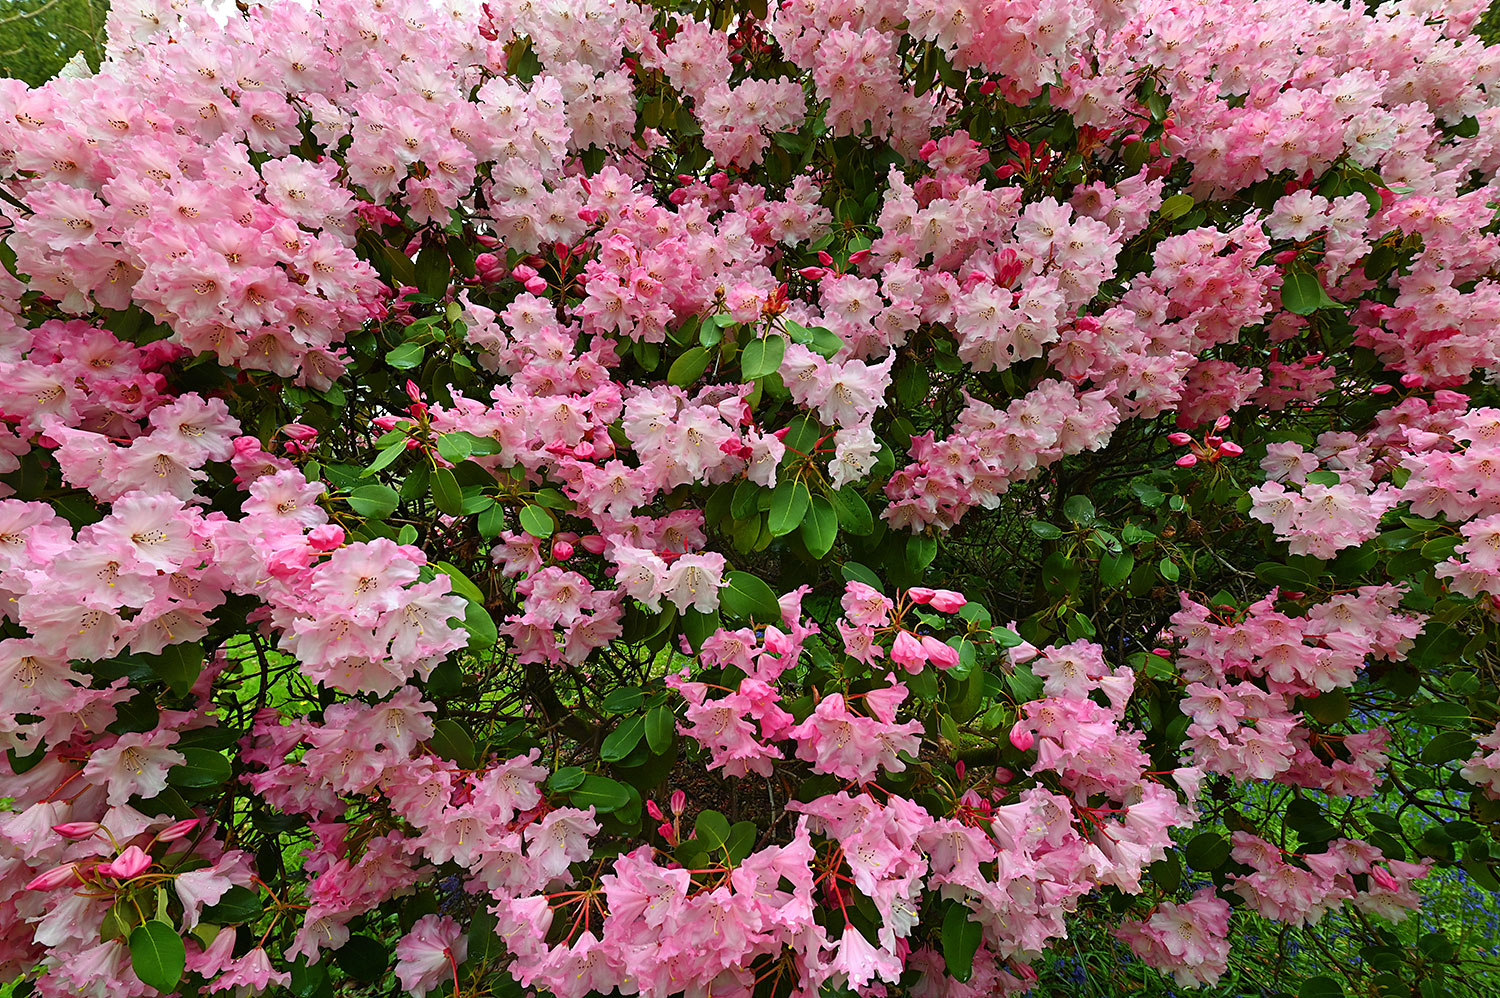 Picture of a pink Rhododendron bush with some green leaves visible